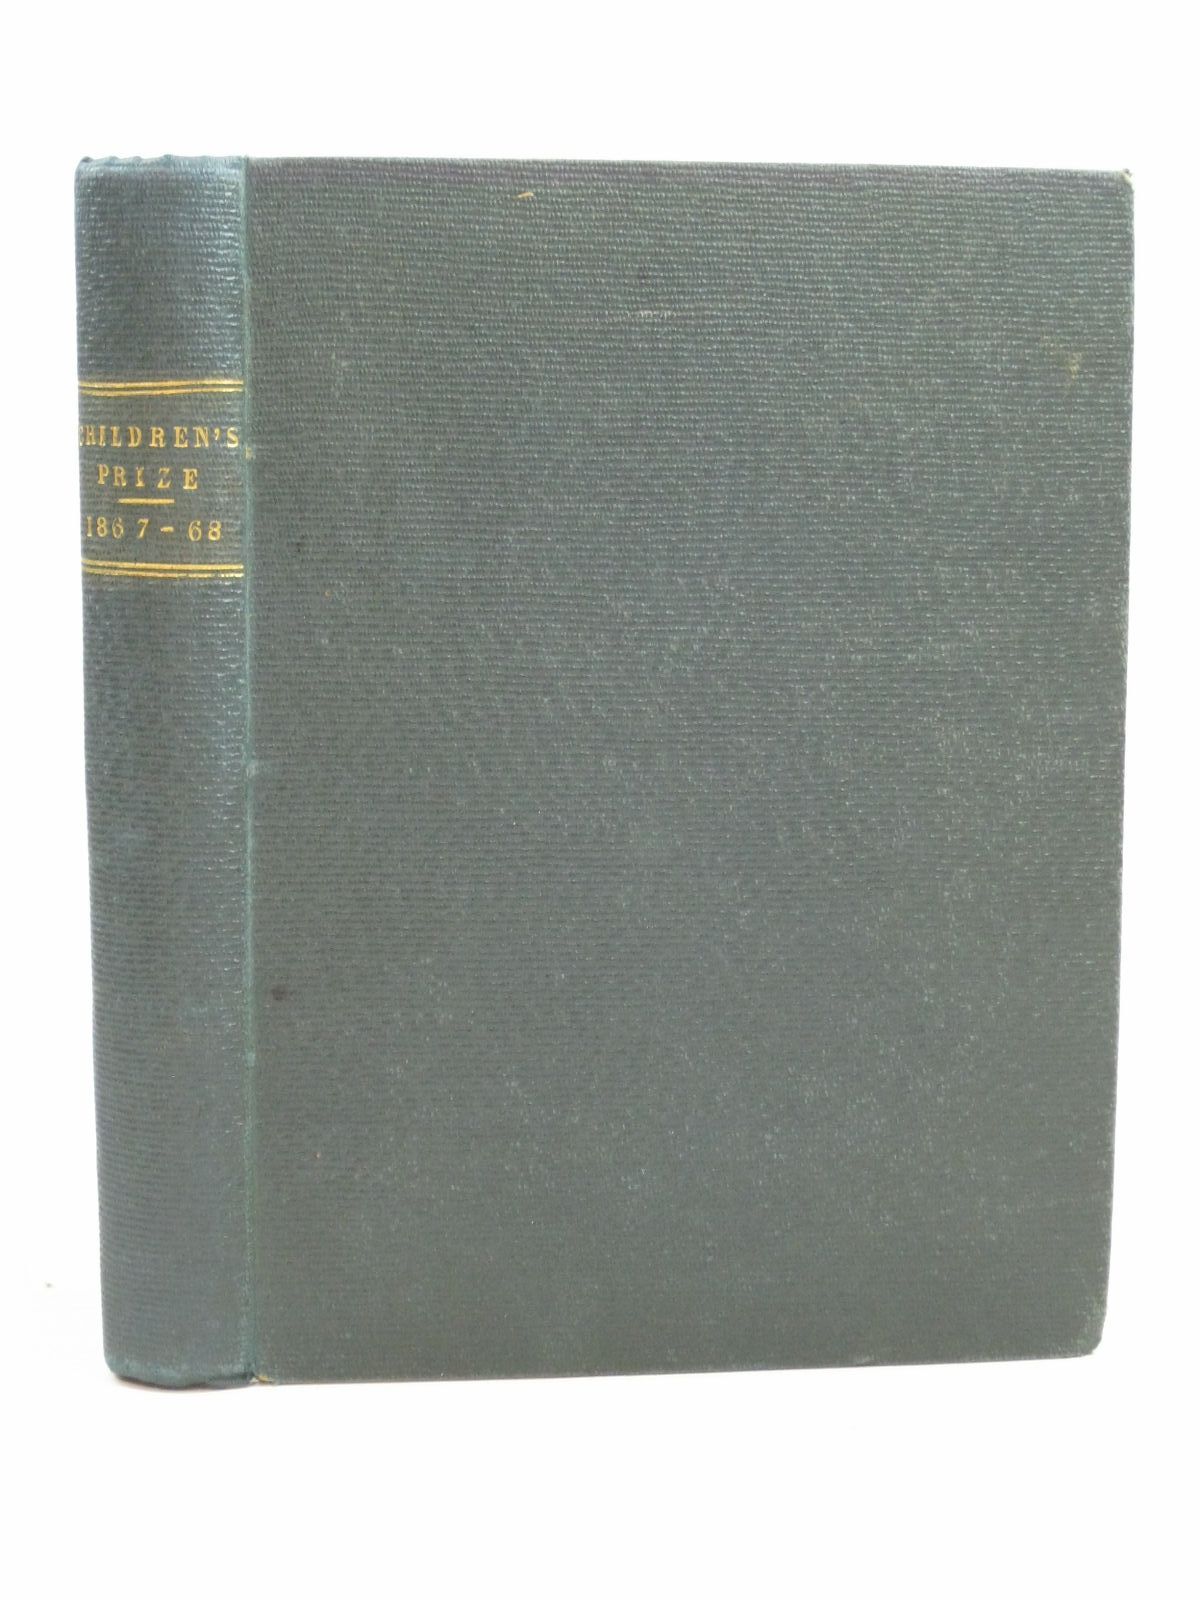 Photo of THE CHILDREN'S PRIZE 1867 - 68 written by Clarke, J. Erskine published by William Macintosh (STOCK CODE: 1404850)  for sale by Stella & Rose's Books